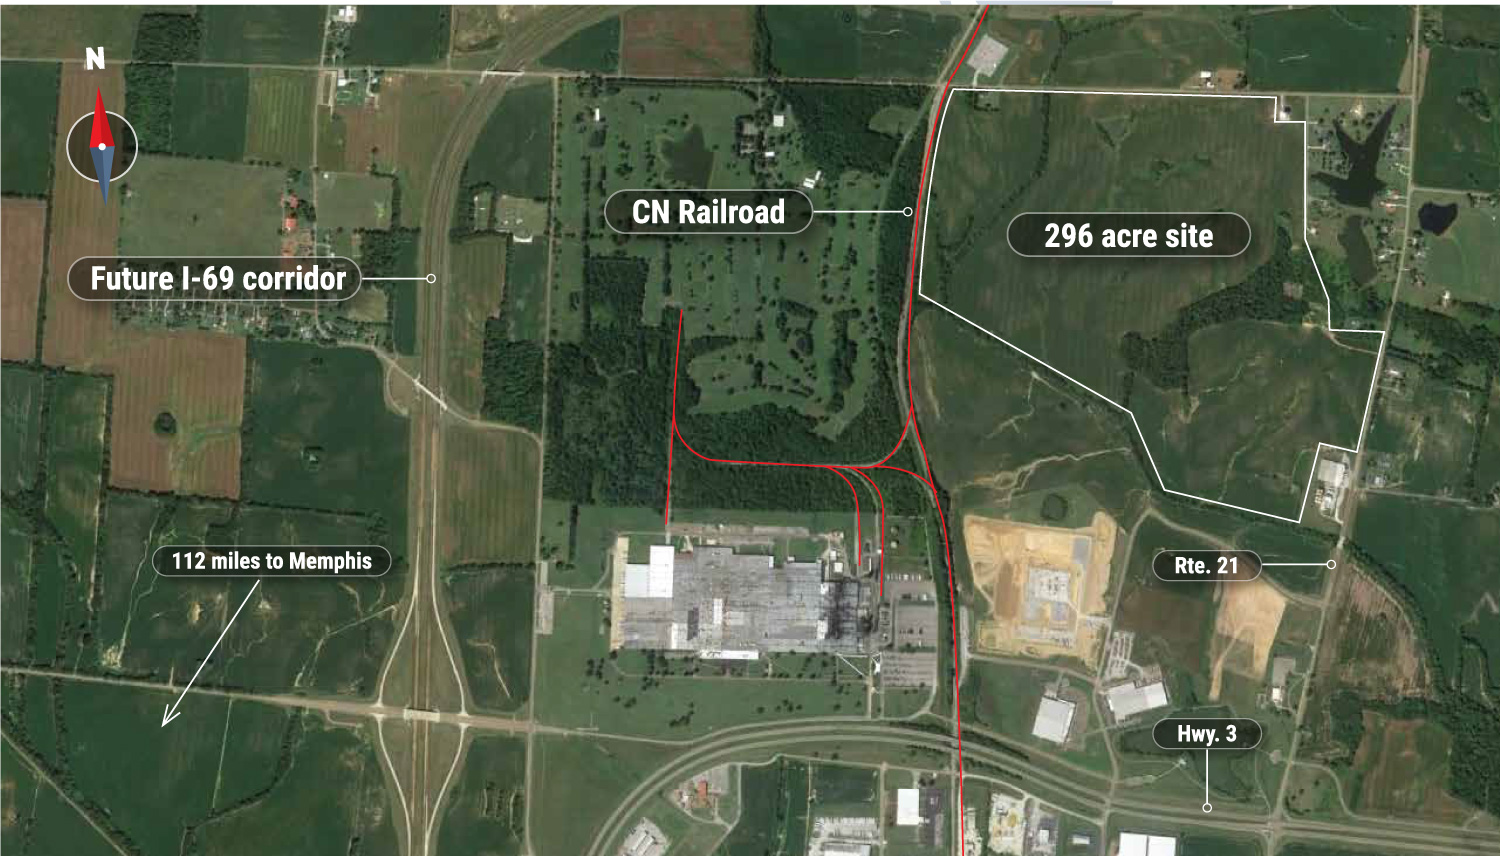 An image of available industrial properties in TN